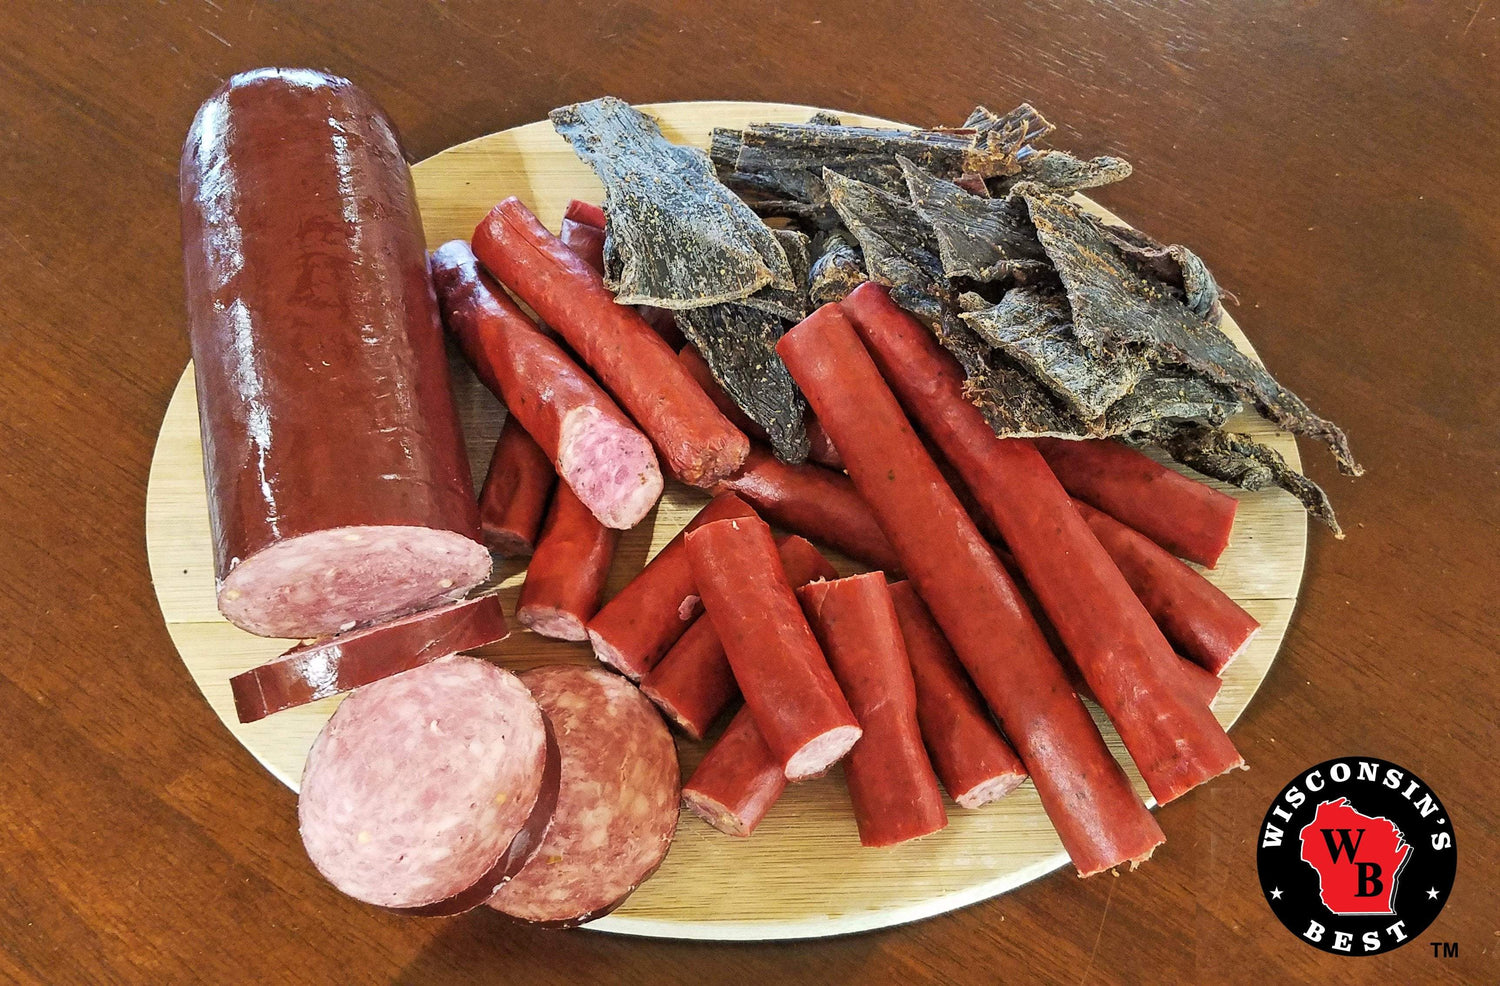 Meat snacks on a place, including: summer sausage, beef sticks and beef jerky